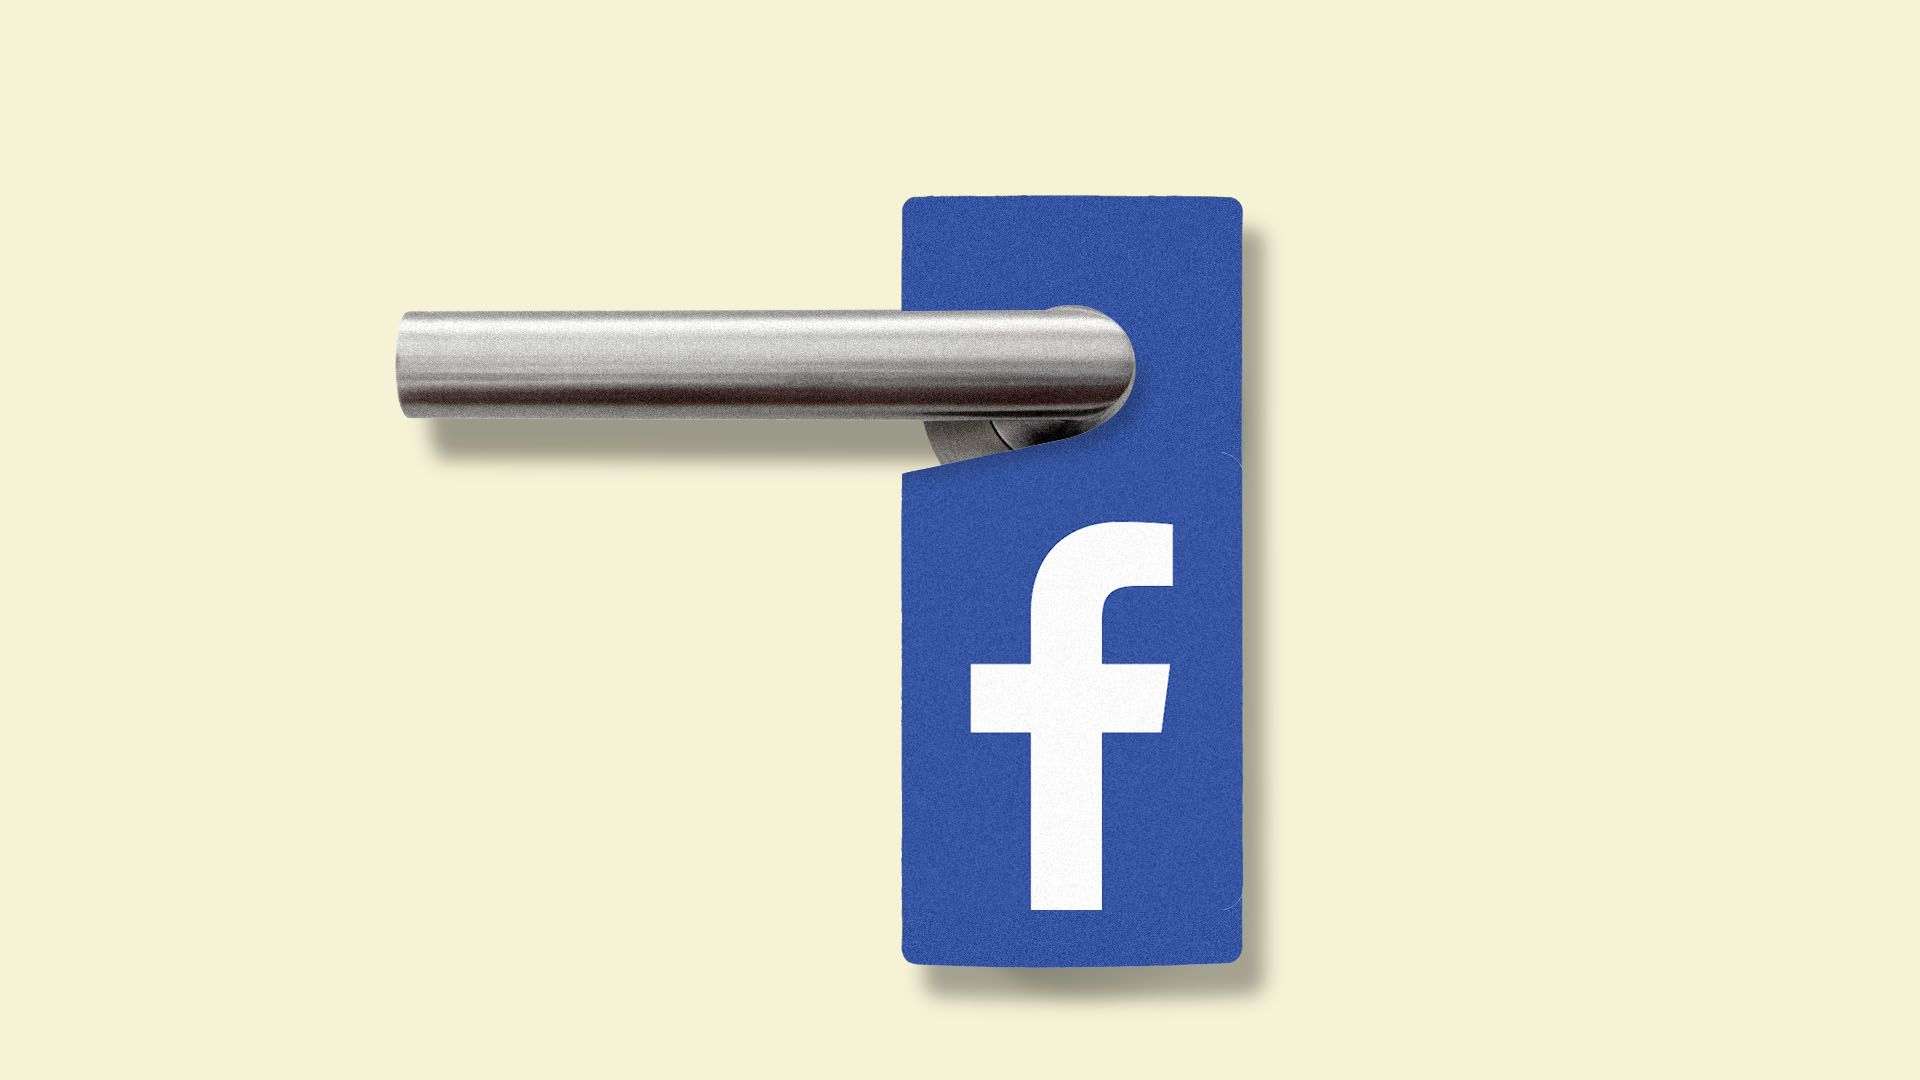 This illustration shows a "Do not disturb sign" hanging on a door handle, except the sign only has the Facebook logo.